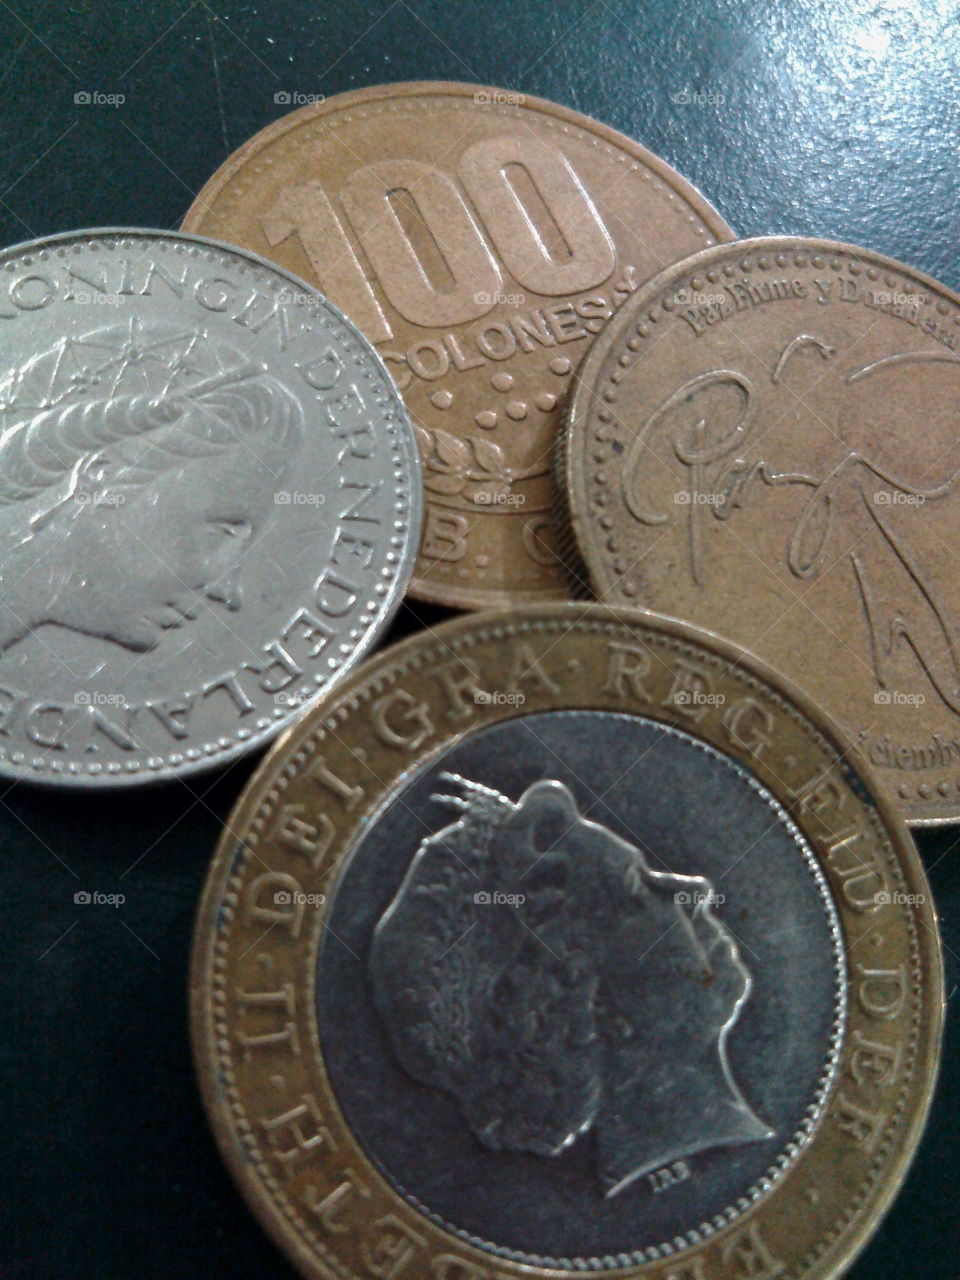 Denominations of coins